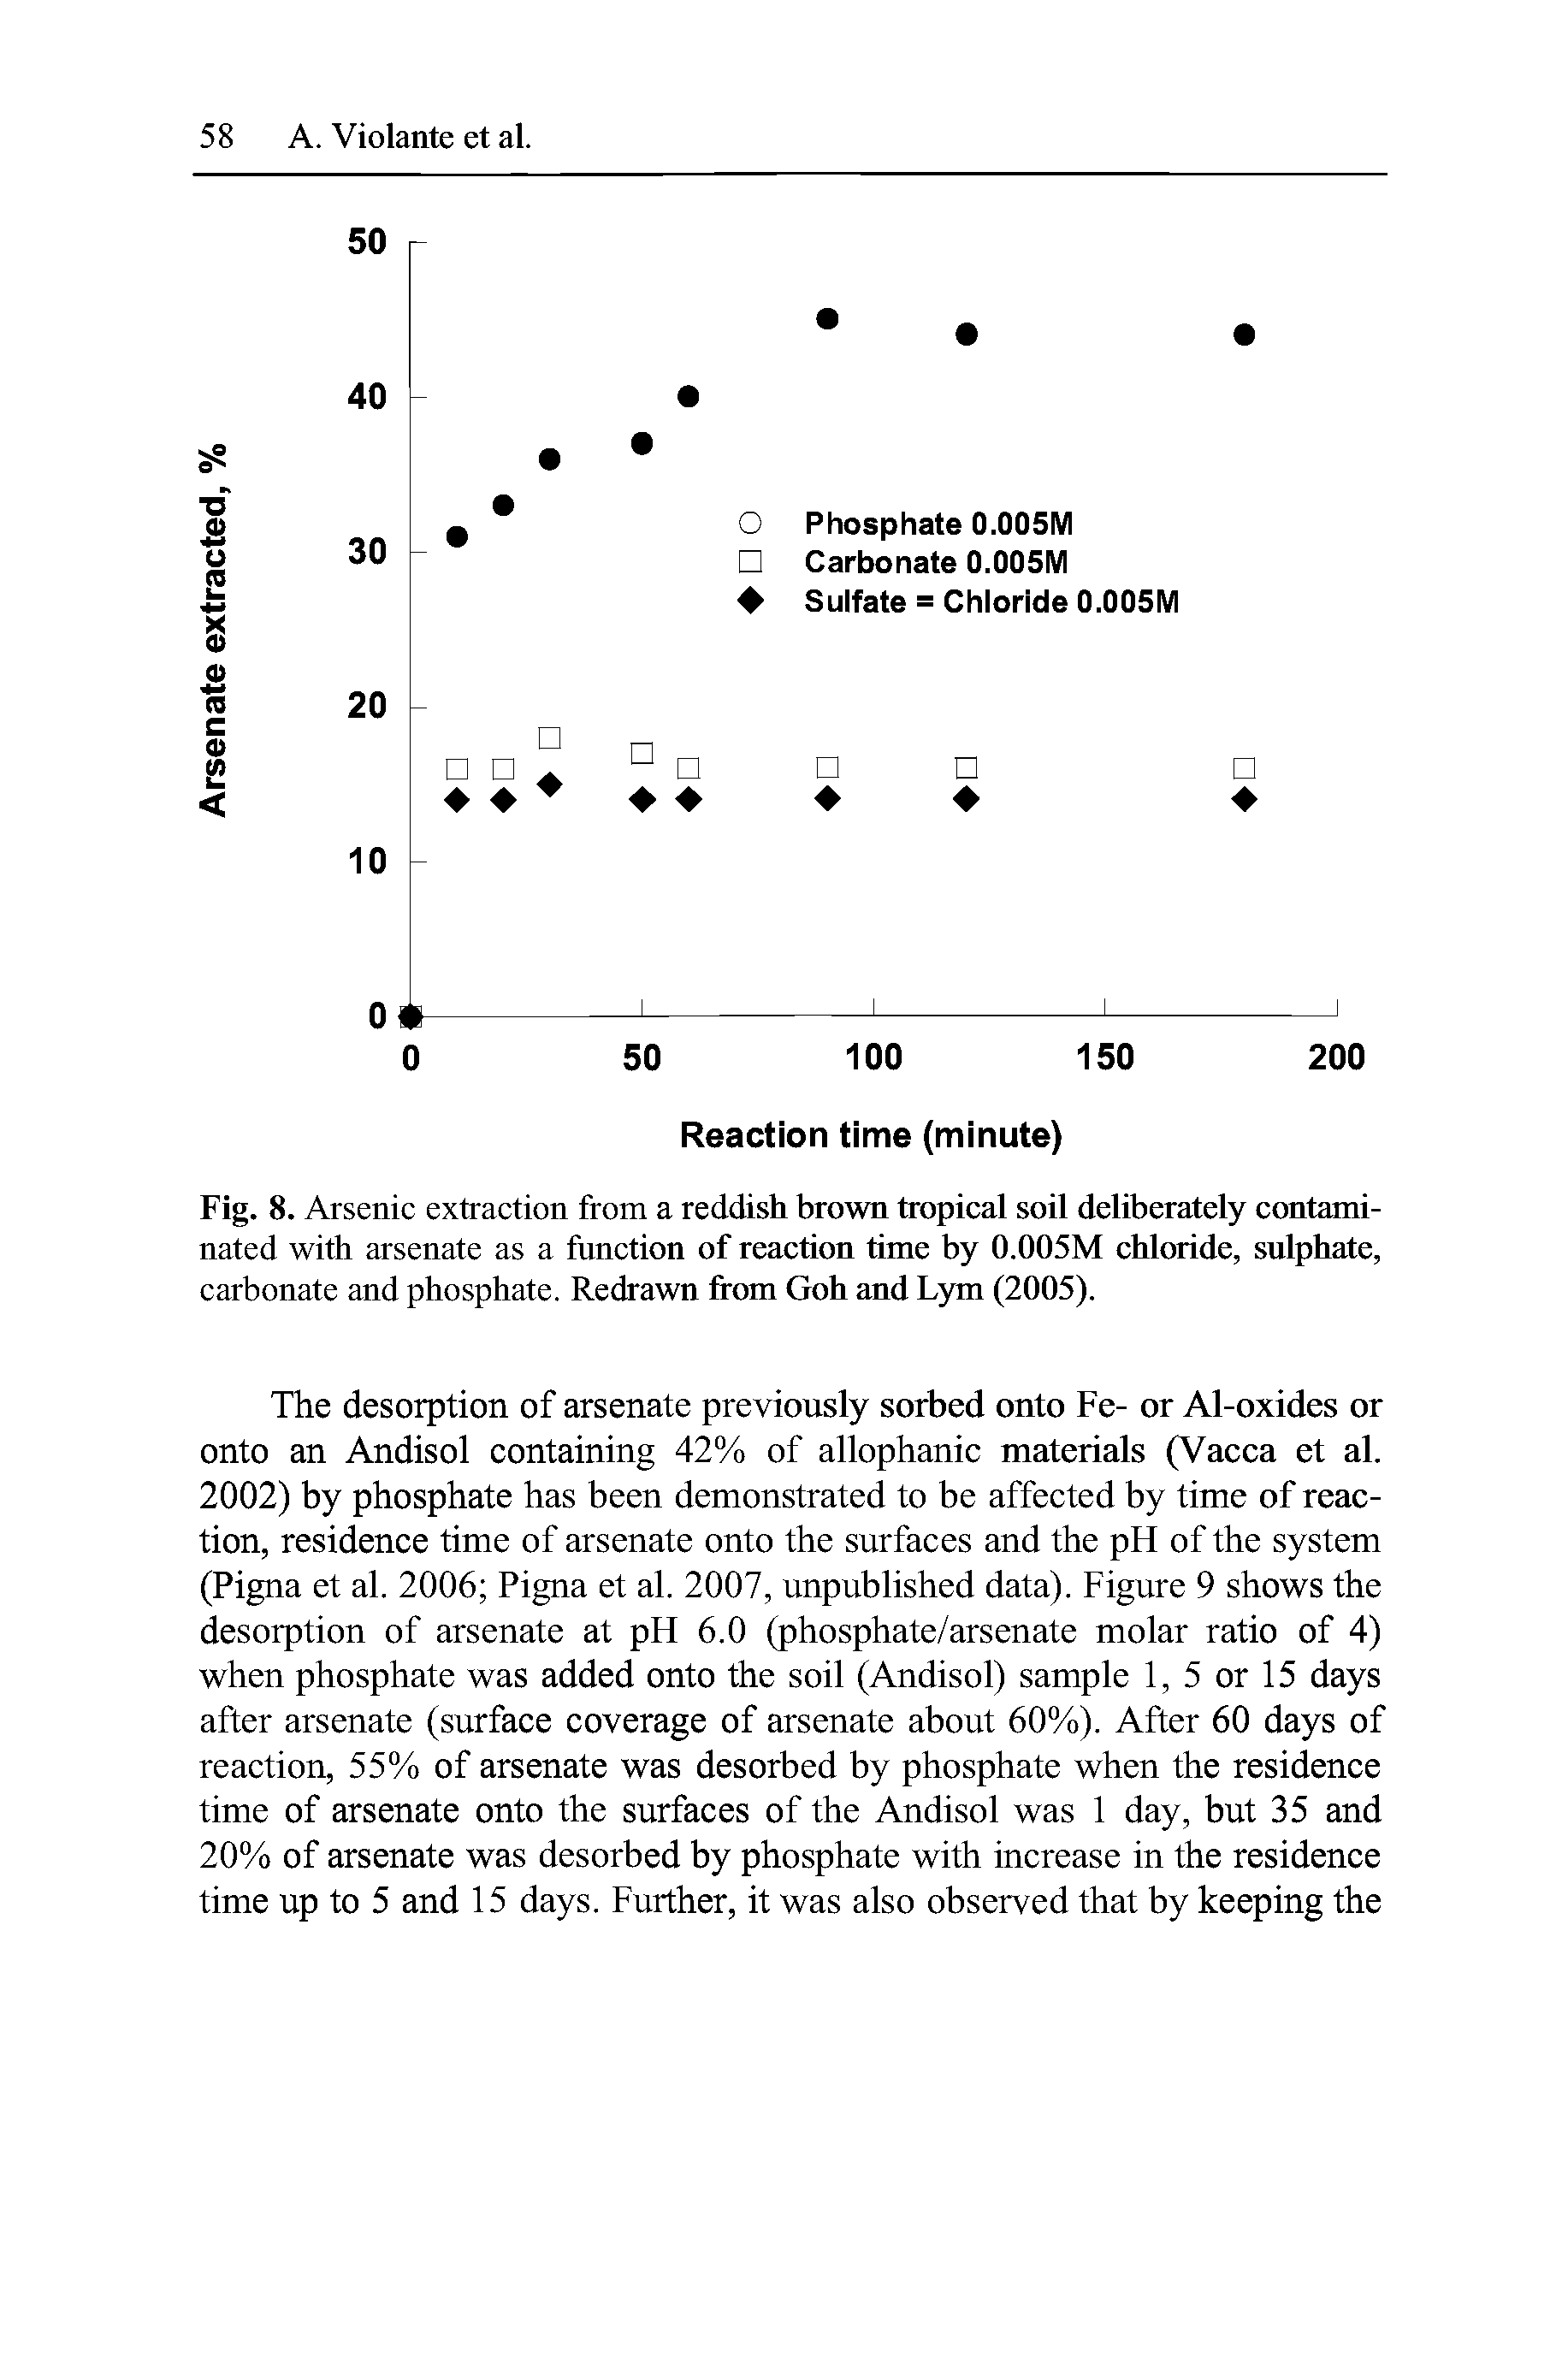 Fig. 8. Arsenic extraction from a reddish brown tropical soil deliberately contaminated with arsenate as a function of reaction time by 0.005M chloride, sulphate, carbonate and phosphate. Redrawn from Goh and Lym (2005).